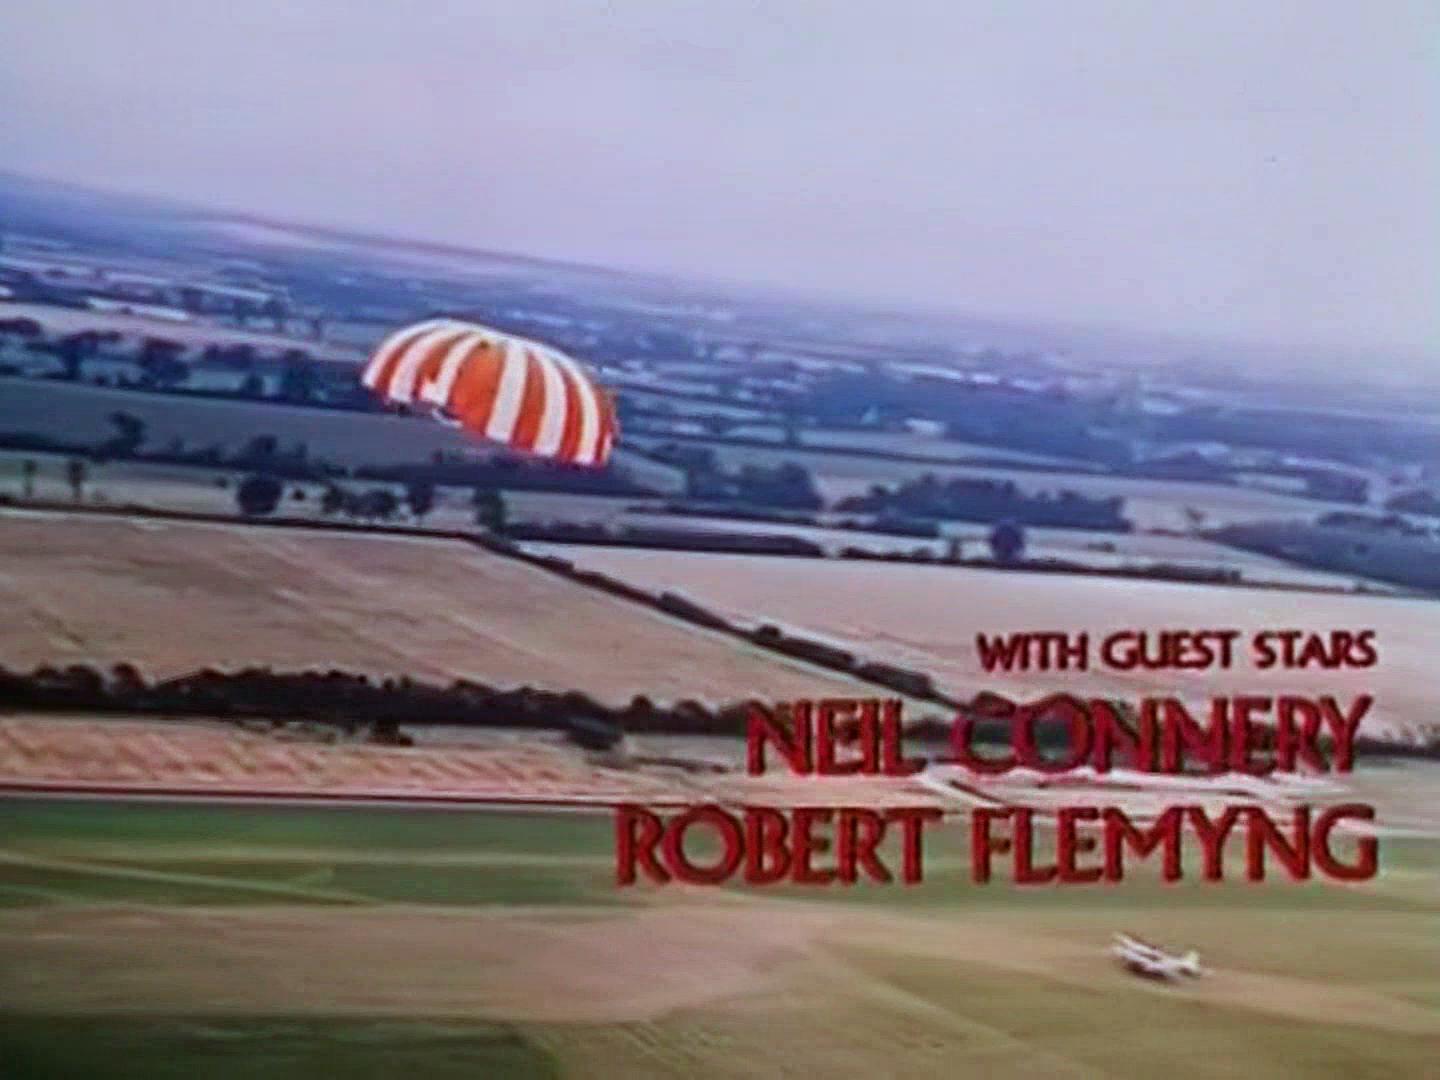 Main title from The Body Stealers (1969) (8). With guest stars Neil Connery, Robert Flemyng